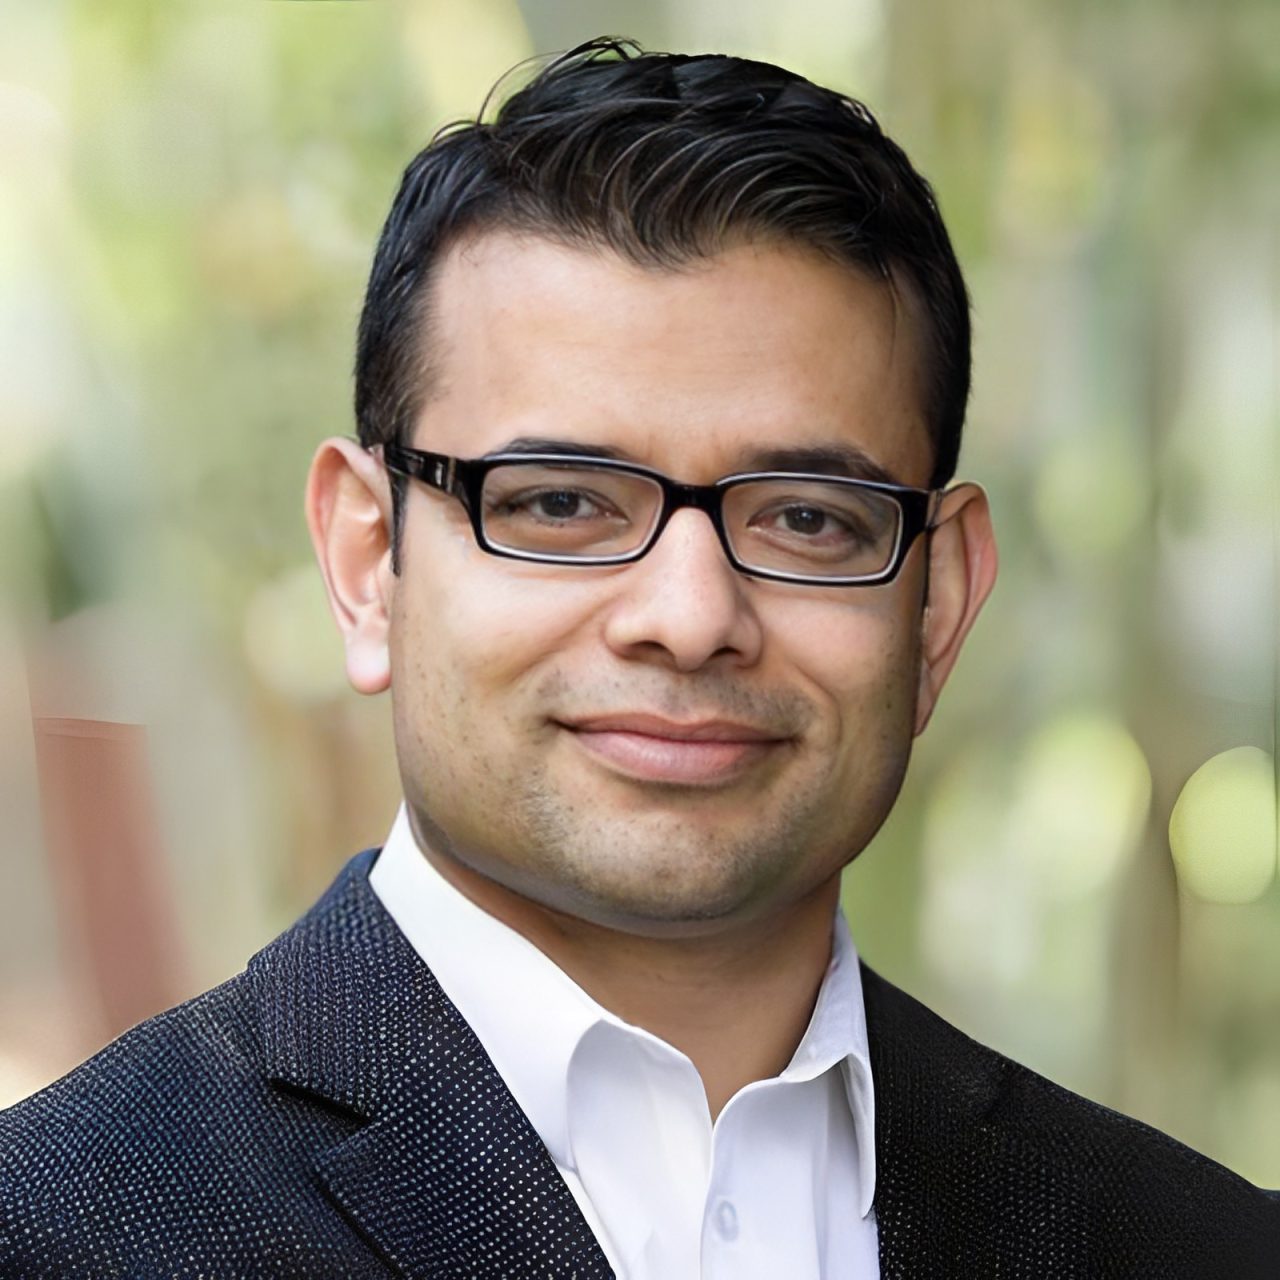 Sumanta Pal: Excited to announce that I have taken on the role of Vice Chair of Academic Affairs in the Department of Medical Oncology and Experimental Therapeutics at City of Hope.